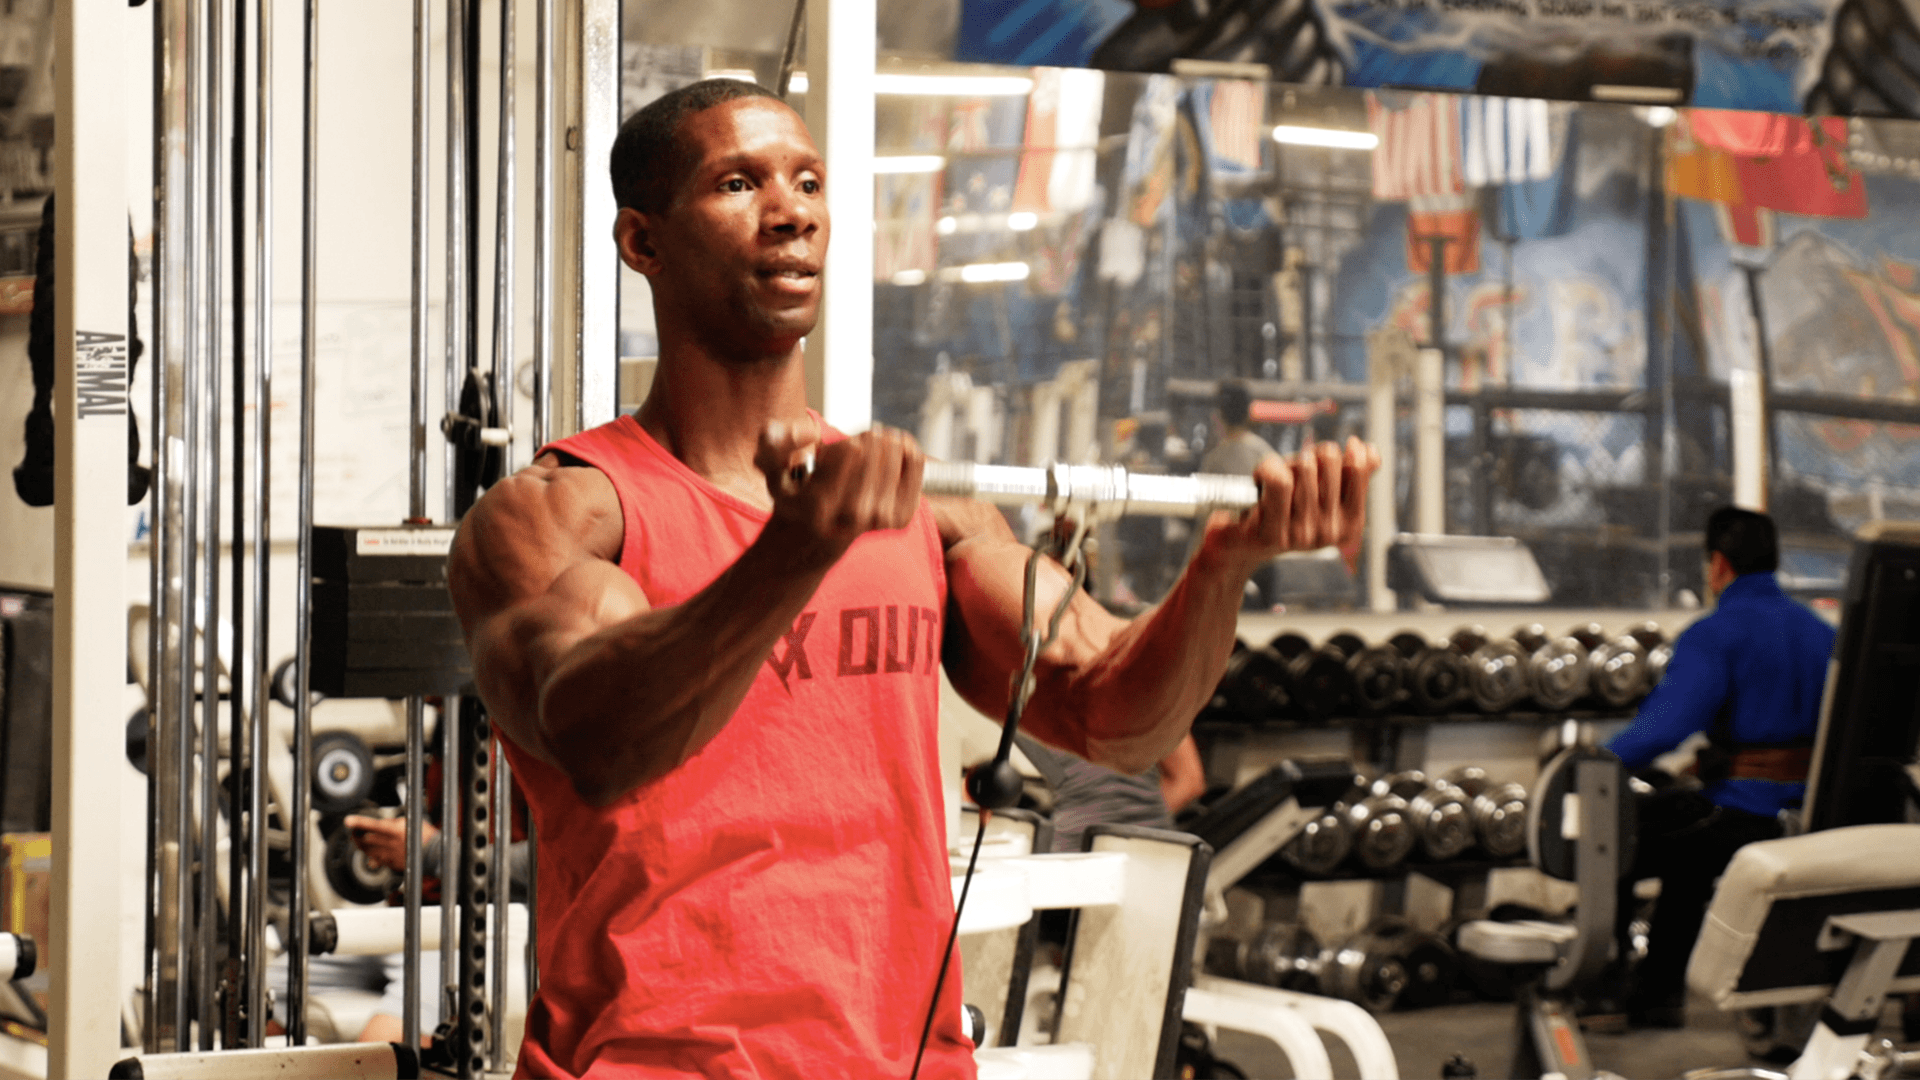 Work your arms, abs, and back with ‘typewriter’ pull-ups